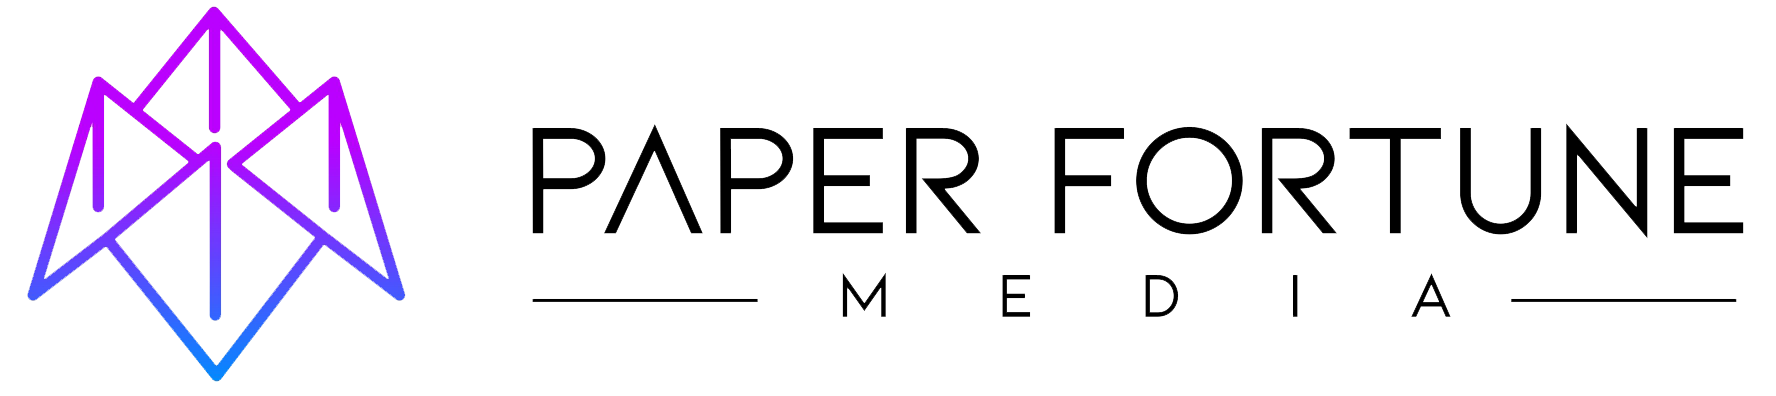 Paper Fortune Media | Performance driven Advertising For Ecommerce Brands